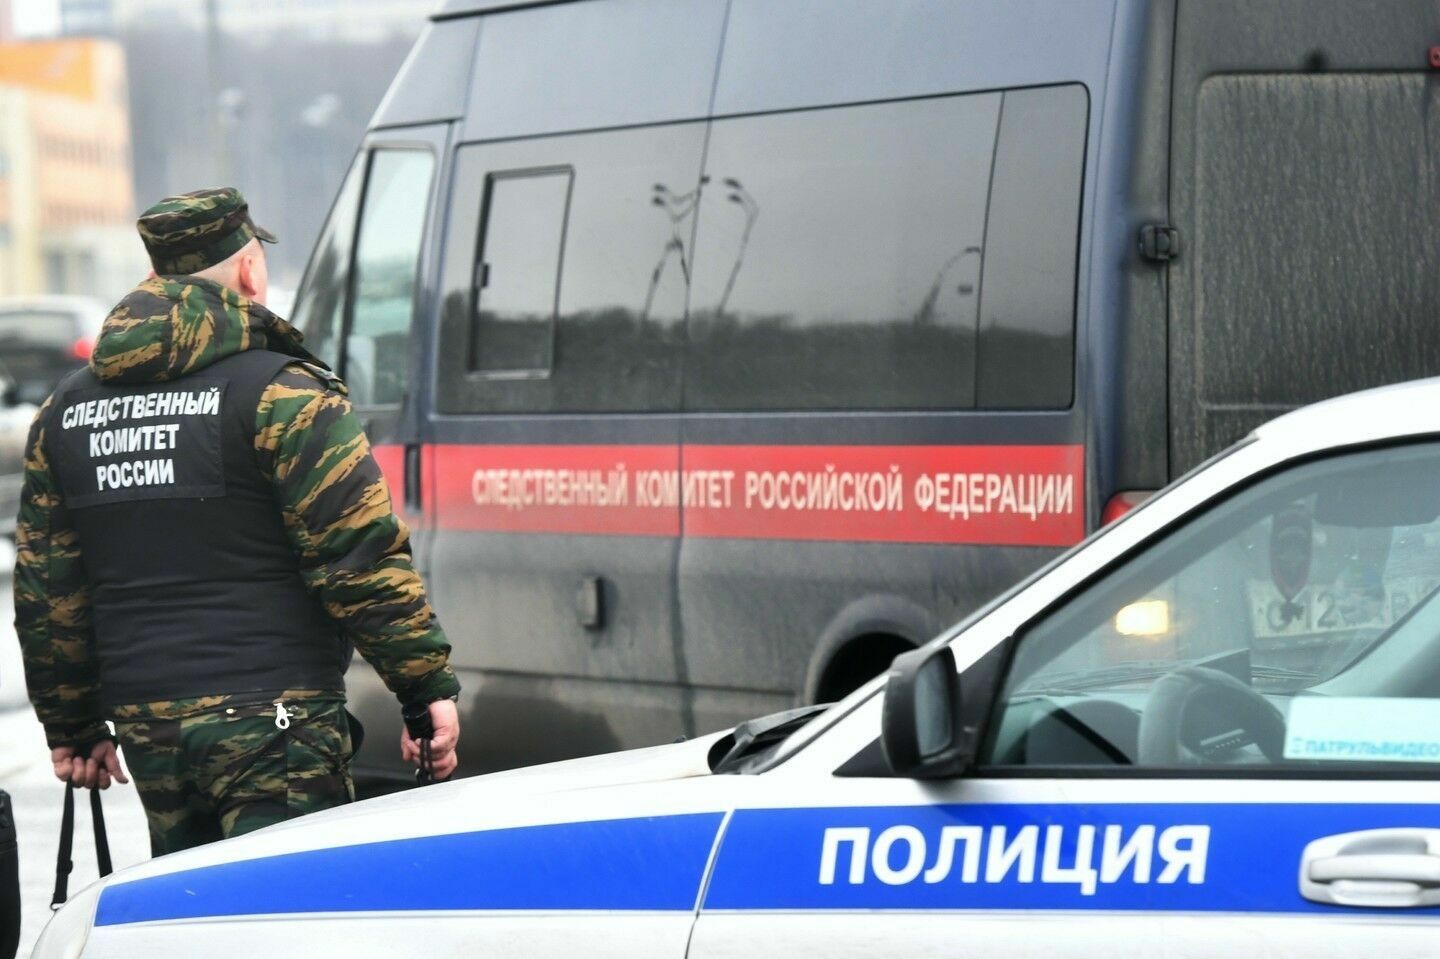 A trafficker of governor's posts was detained in Moscow